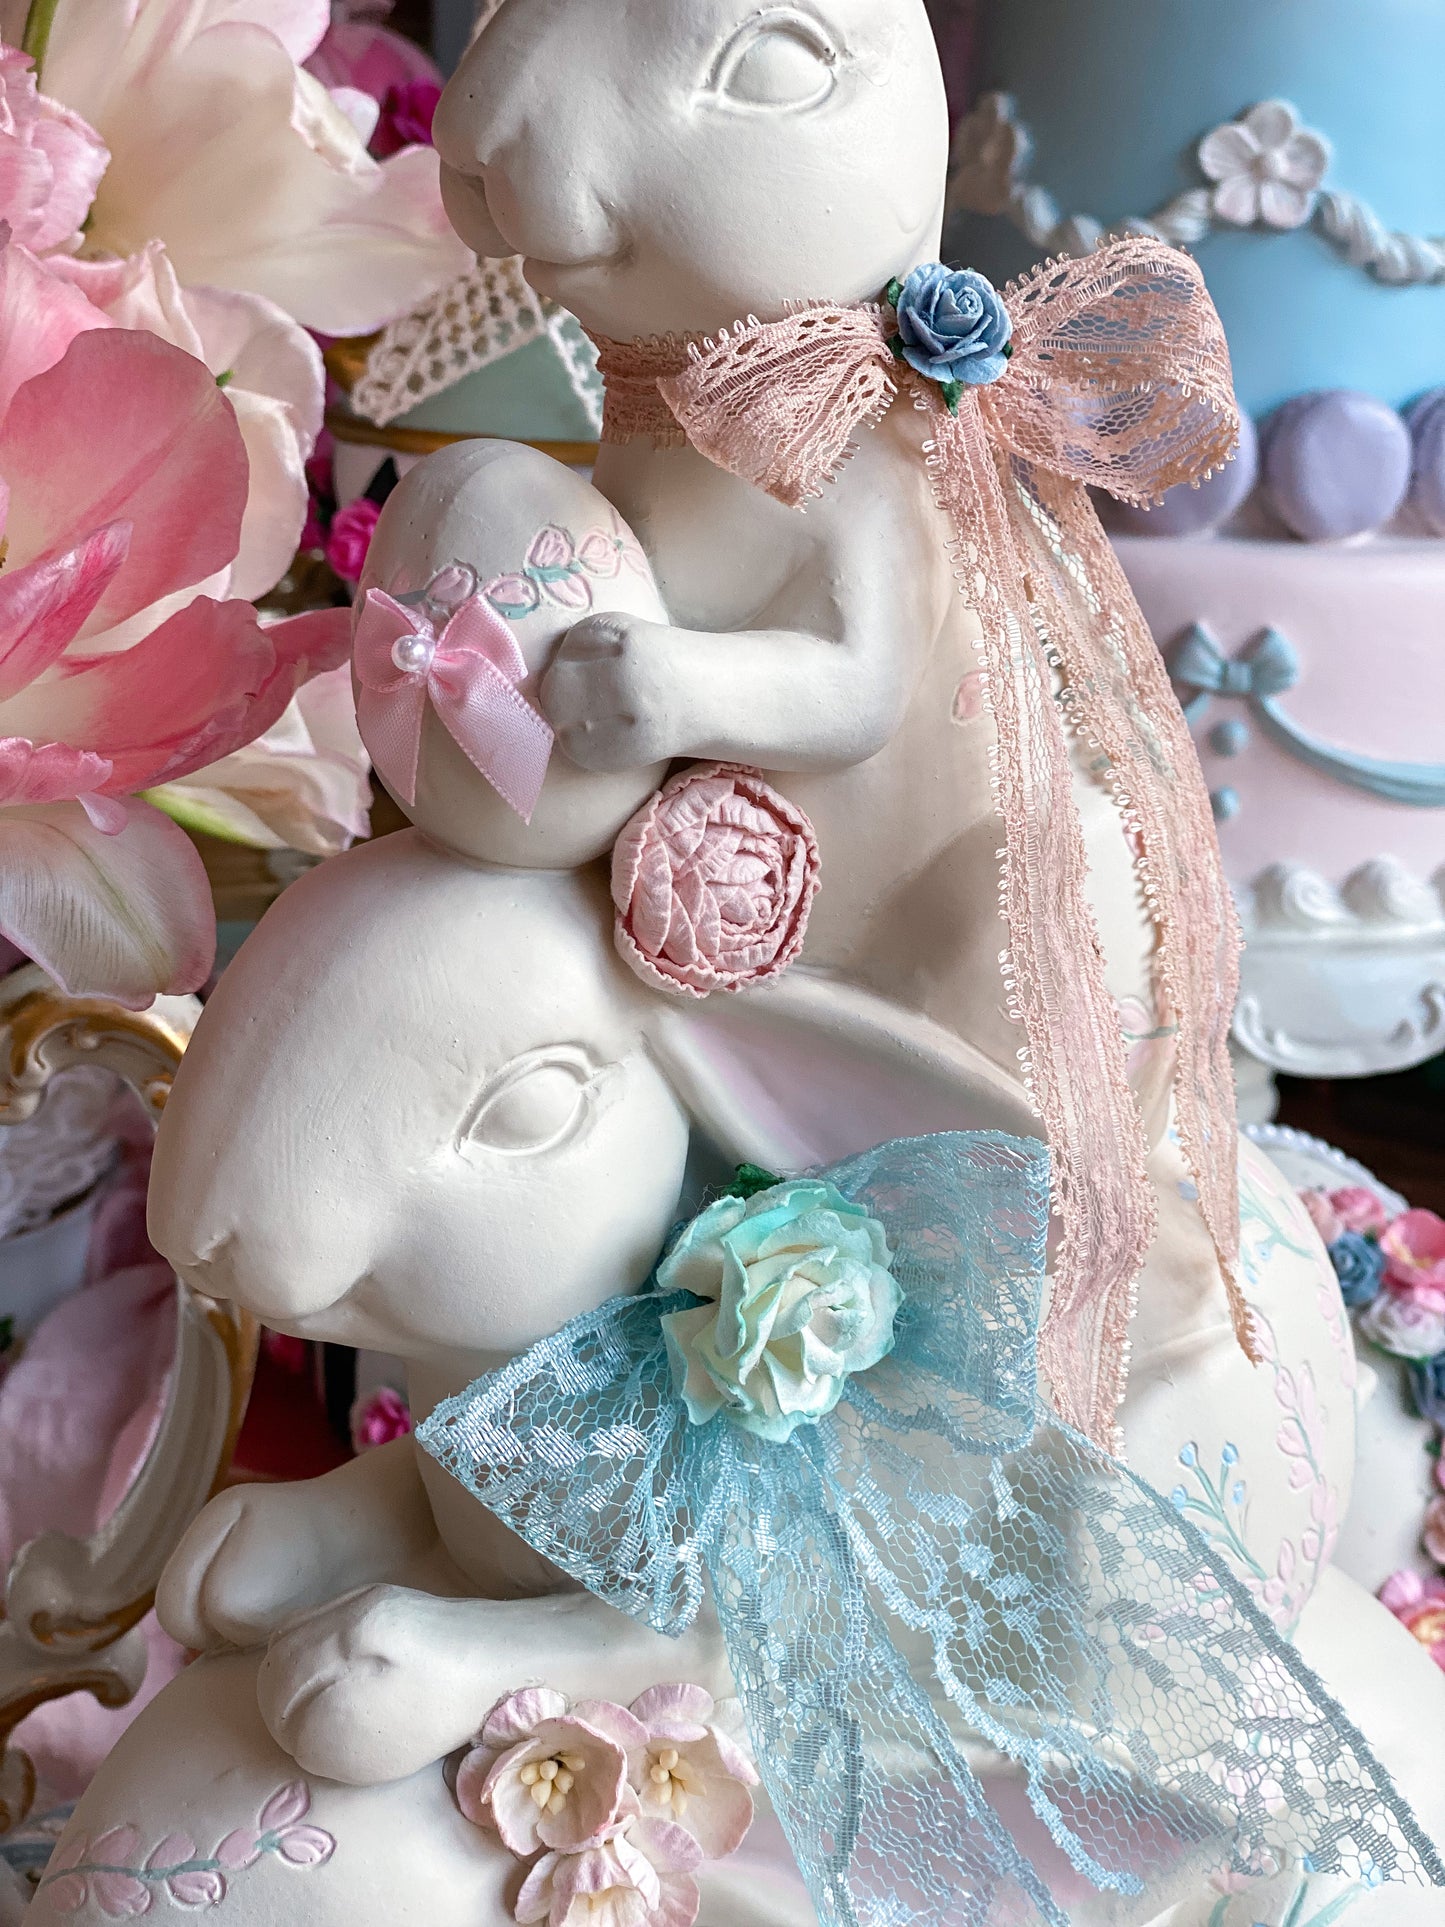 Bespoke Pastel Pink, Blue and Teal Stacked Bunnies with Flowers and Vintage Ribbon